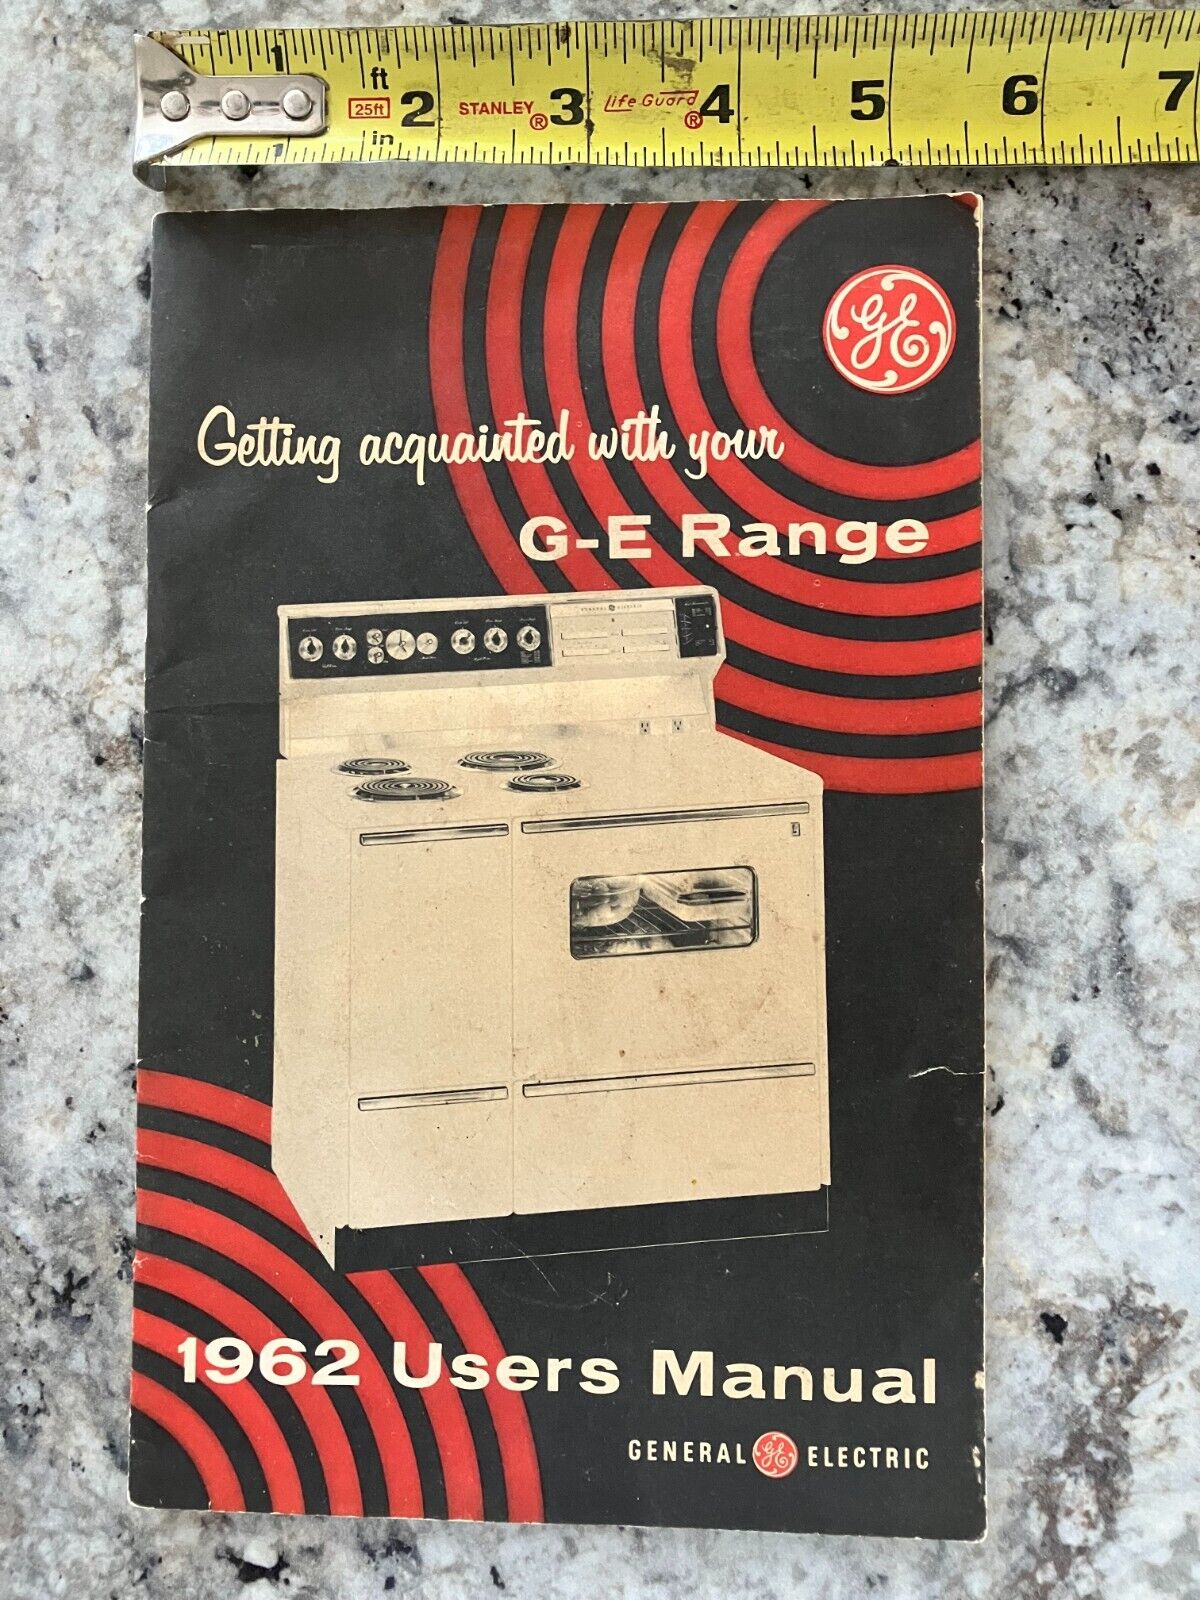 1962 GE Range Users Manual General Electric Getting Acquainted With Your Range